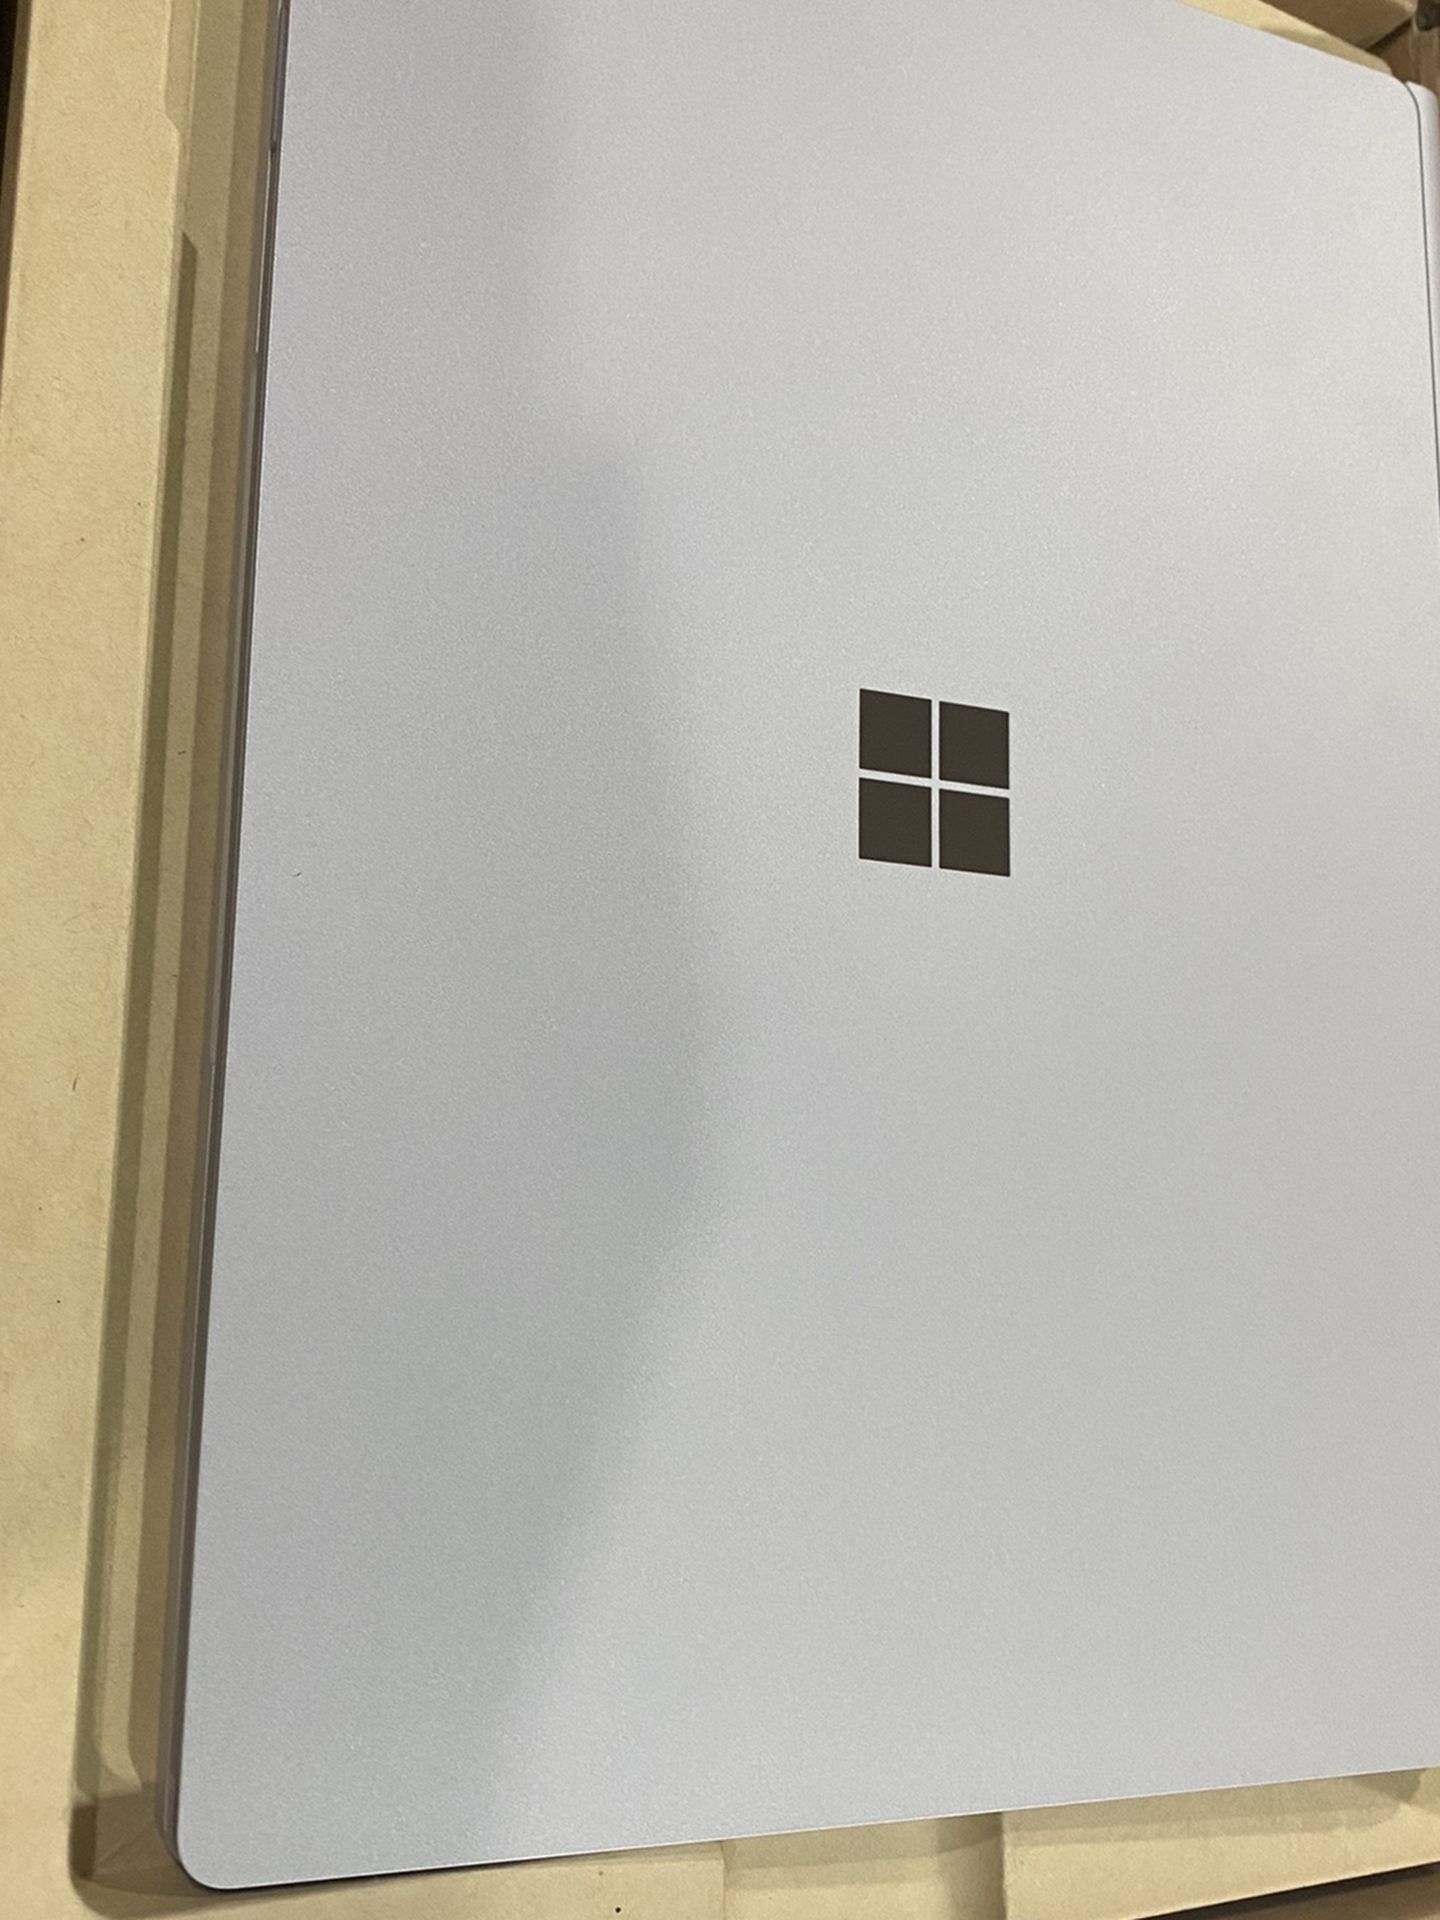 Microsoft Surface Book 3 13.5 Inch i7 32 Gb Ram 500 Ssd GTX 1650 With 3 Years Of Warranty